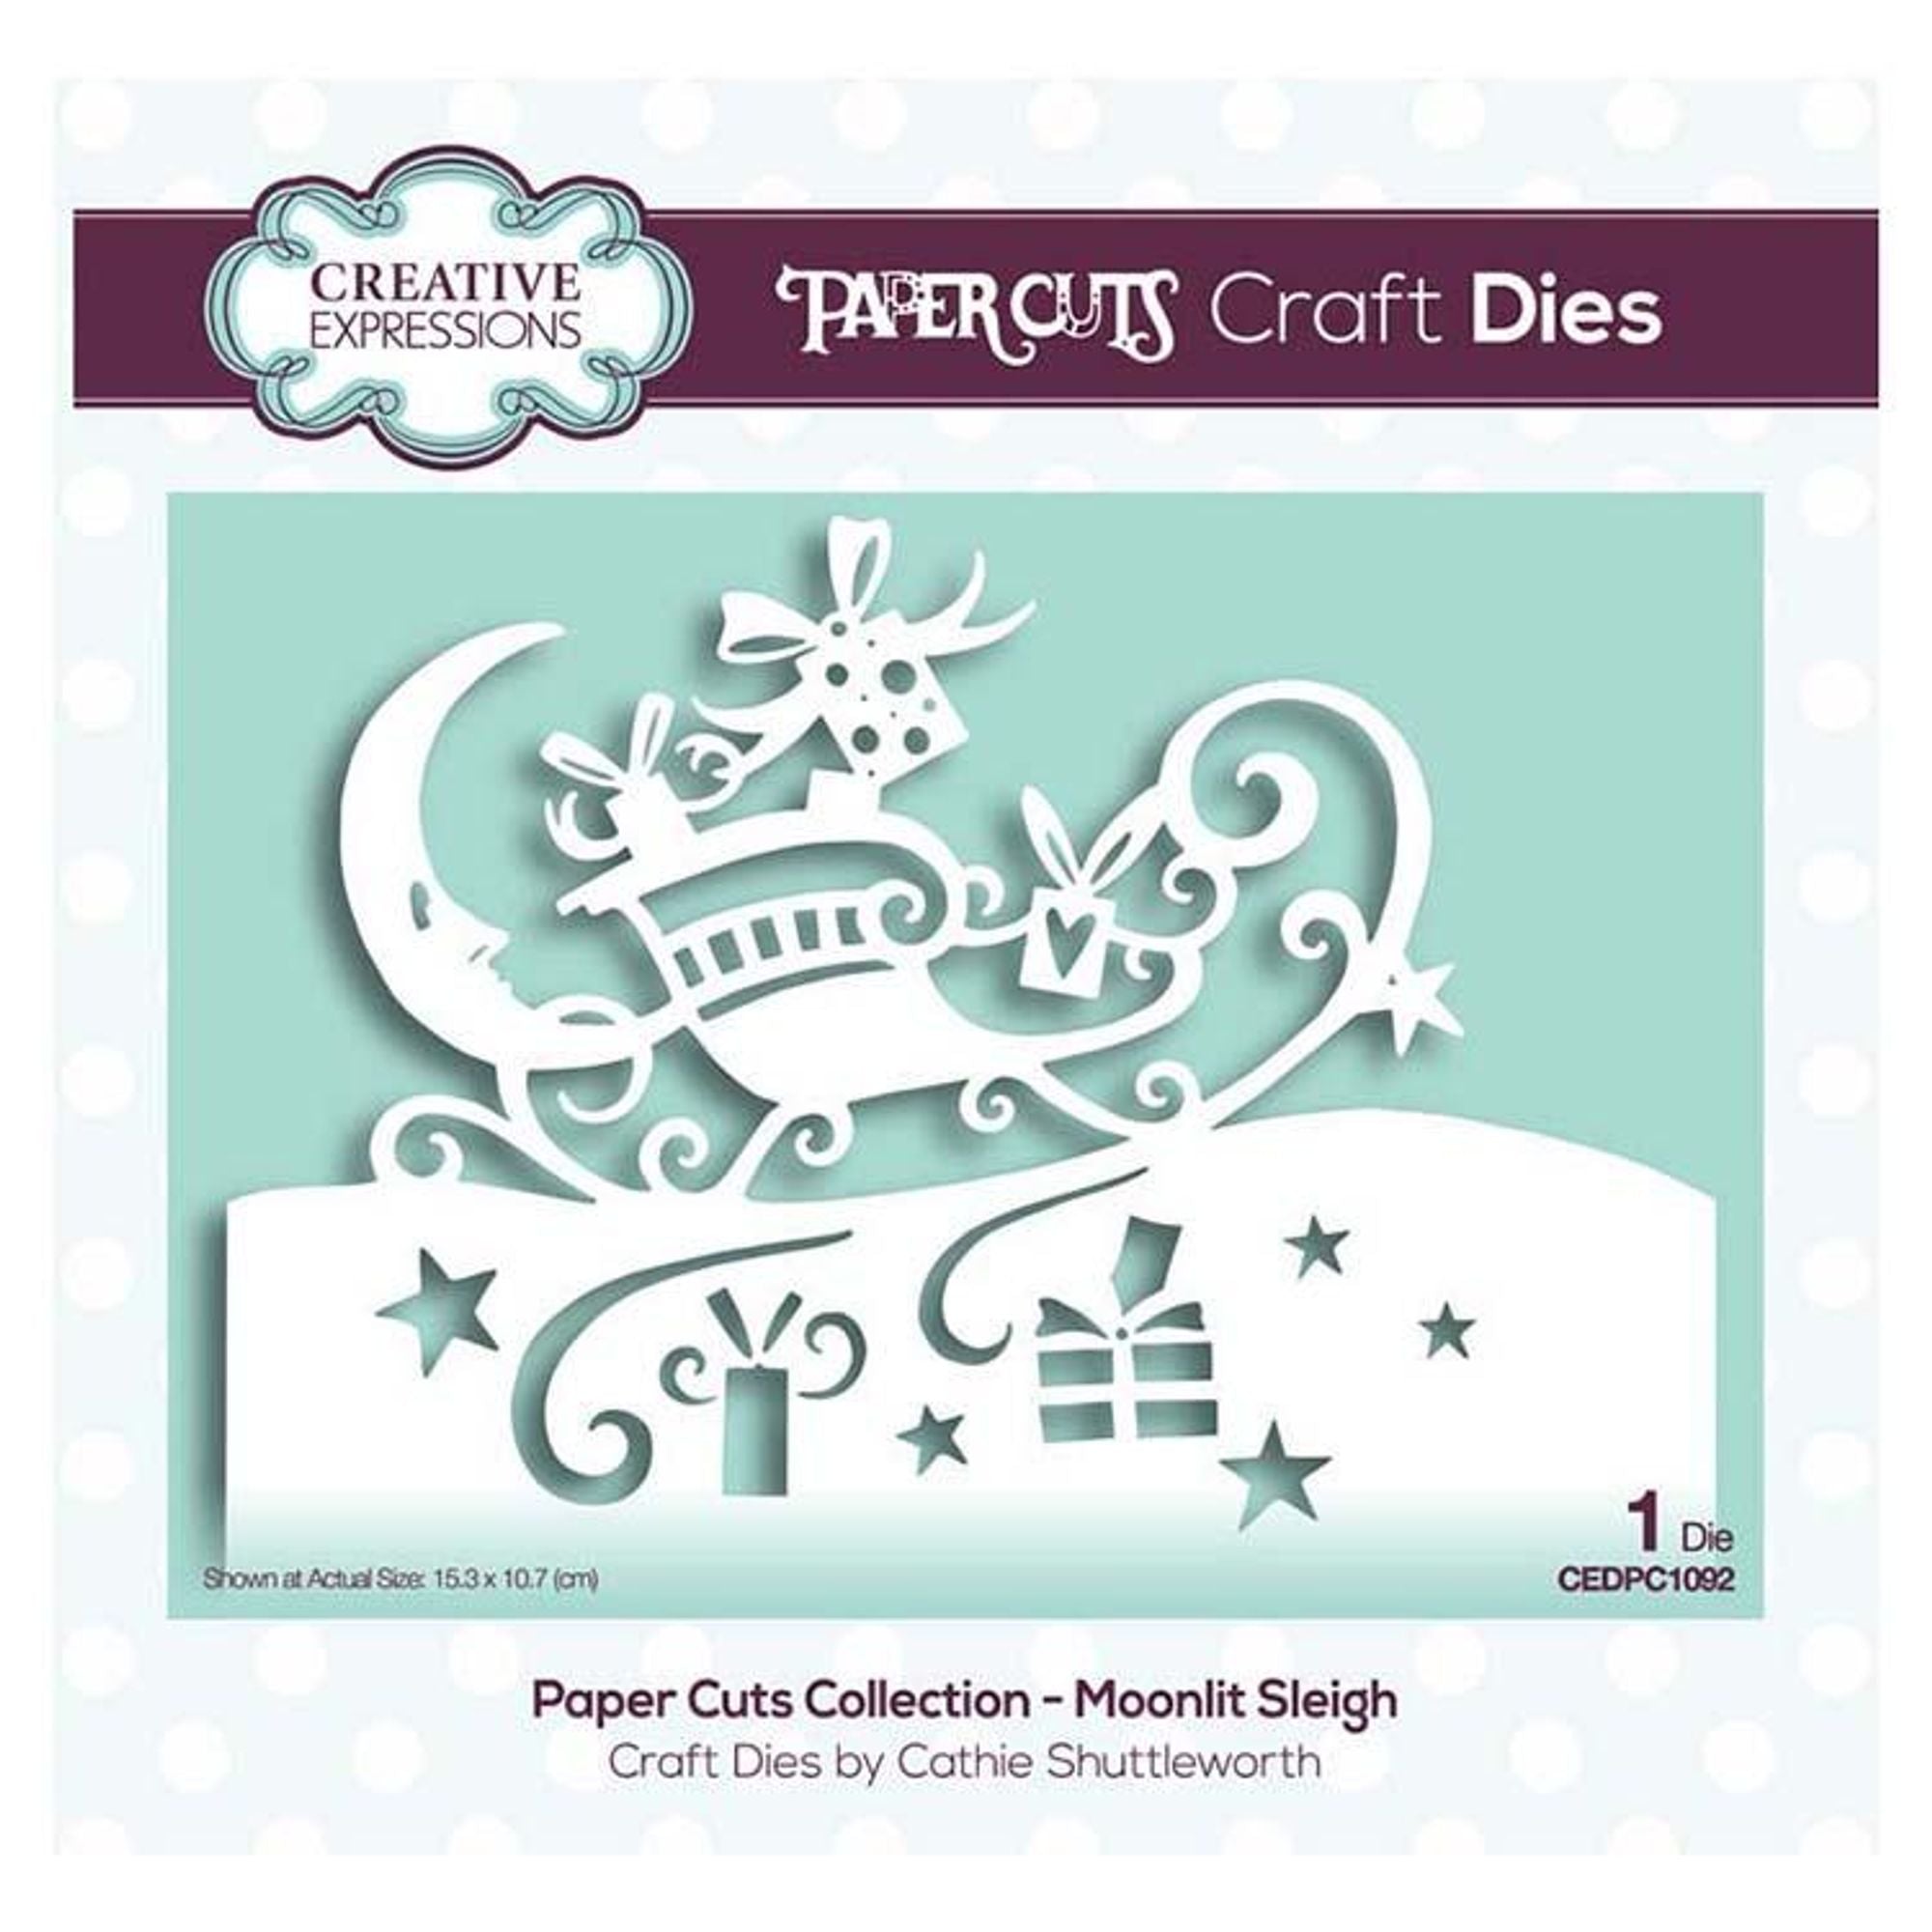 Creative Expressions Paper Cuts Collection - Moonlit Sleigh